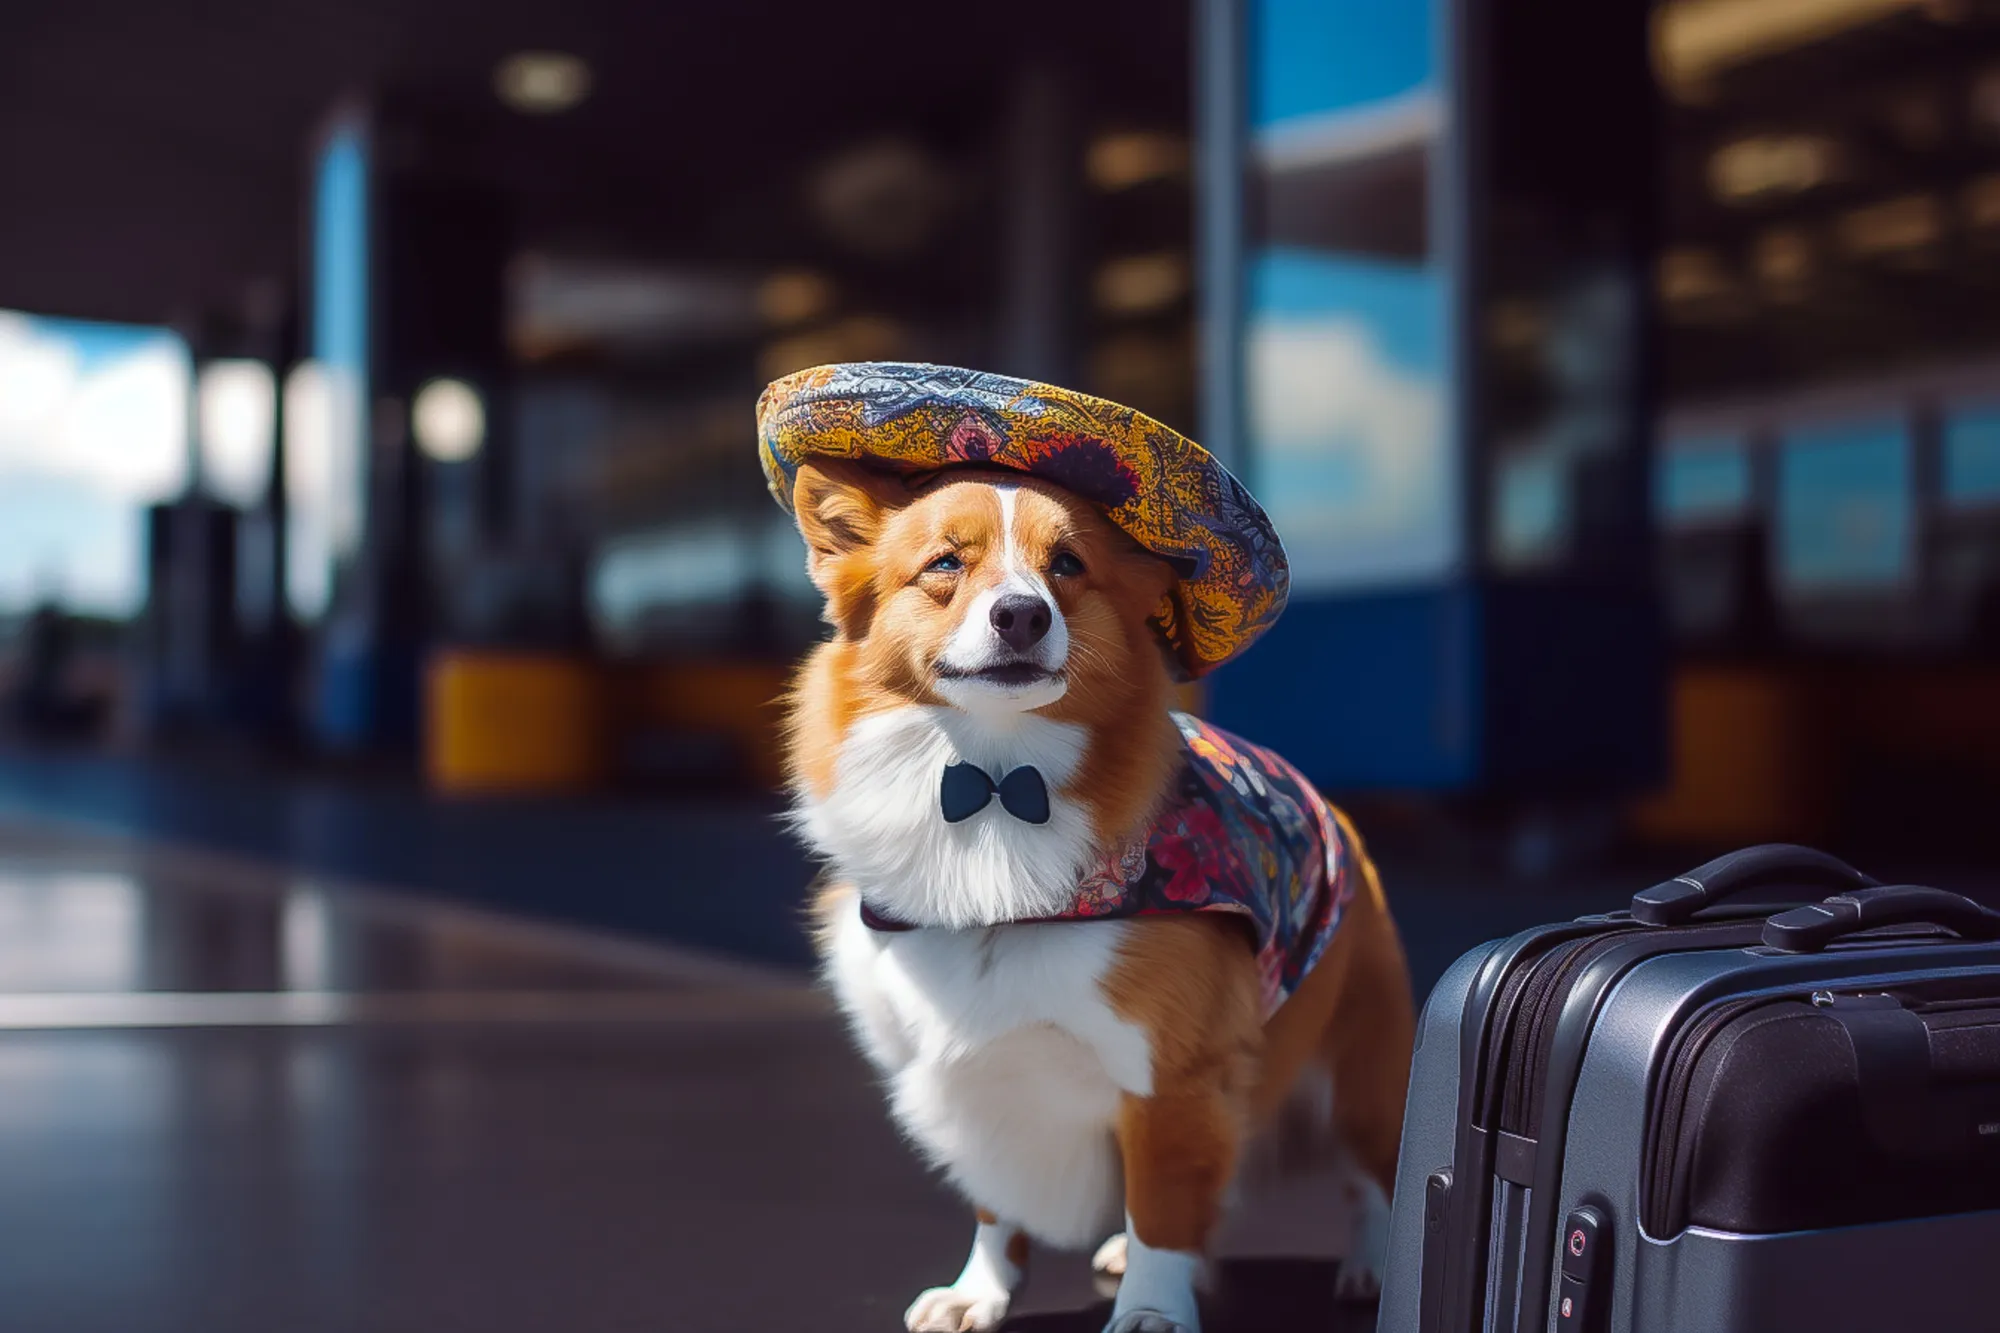 Which Airlines Allow You to Buy a Seat for Your Dog?